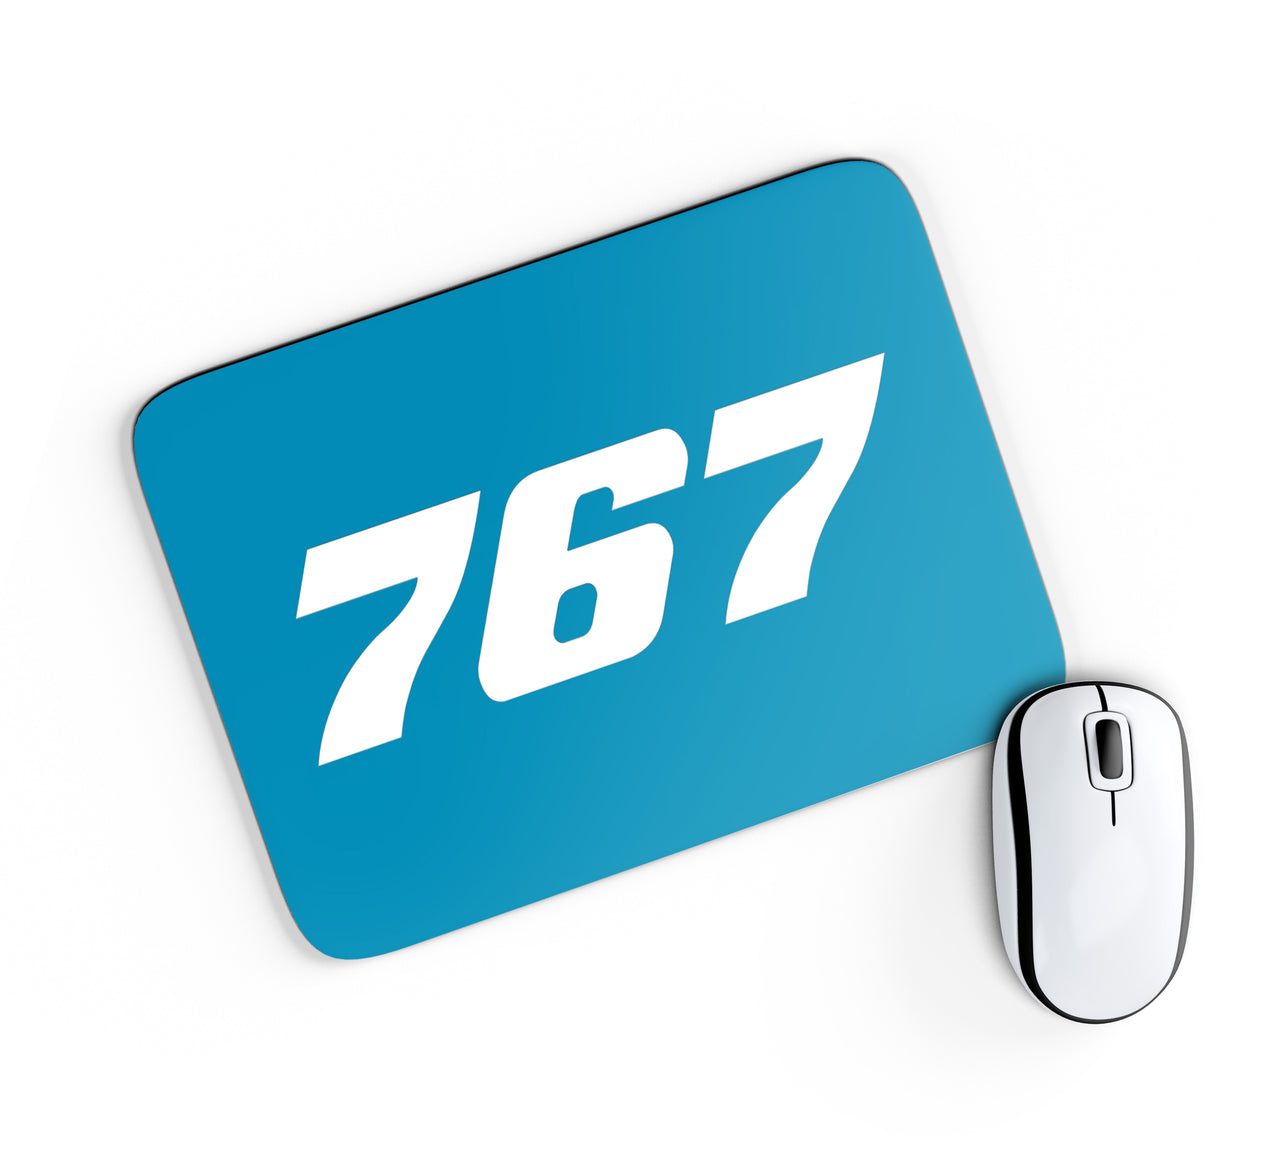 767 Flat Text Designed Mouse Pads